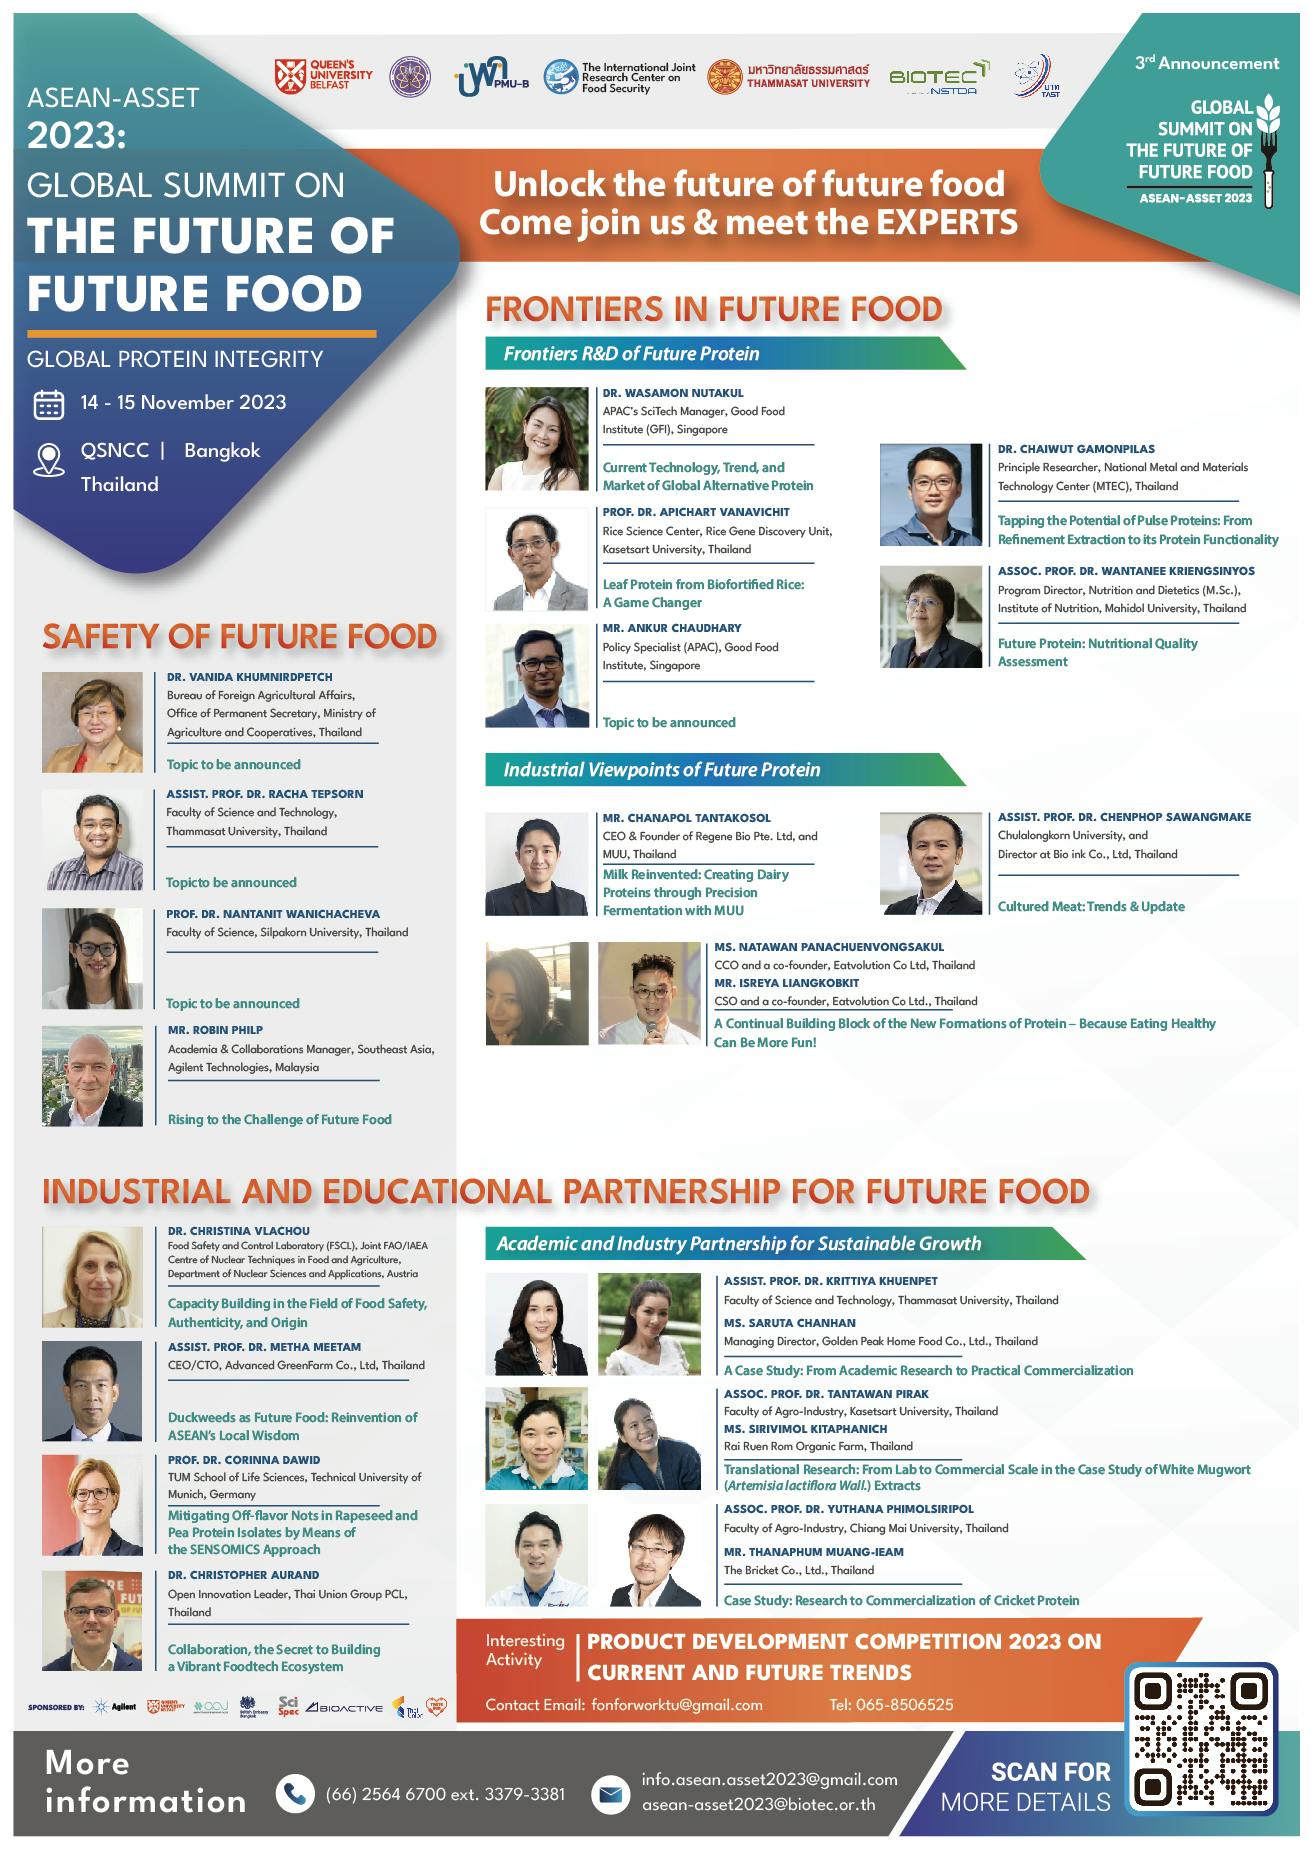 International Conference on ASEAN-ASSET2023: Global Summit on the Future of Future Food "Global Protein Integrity"